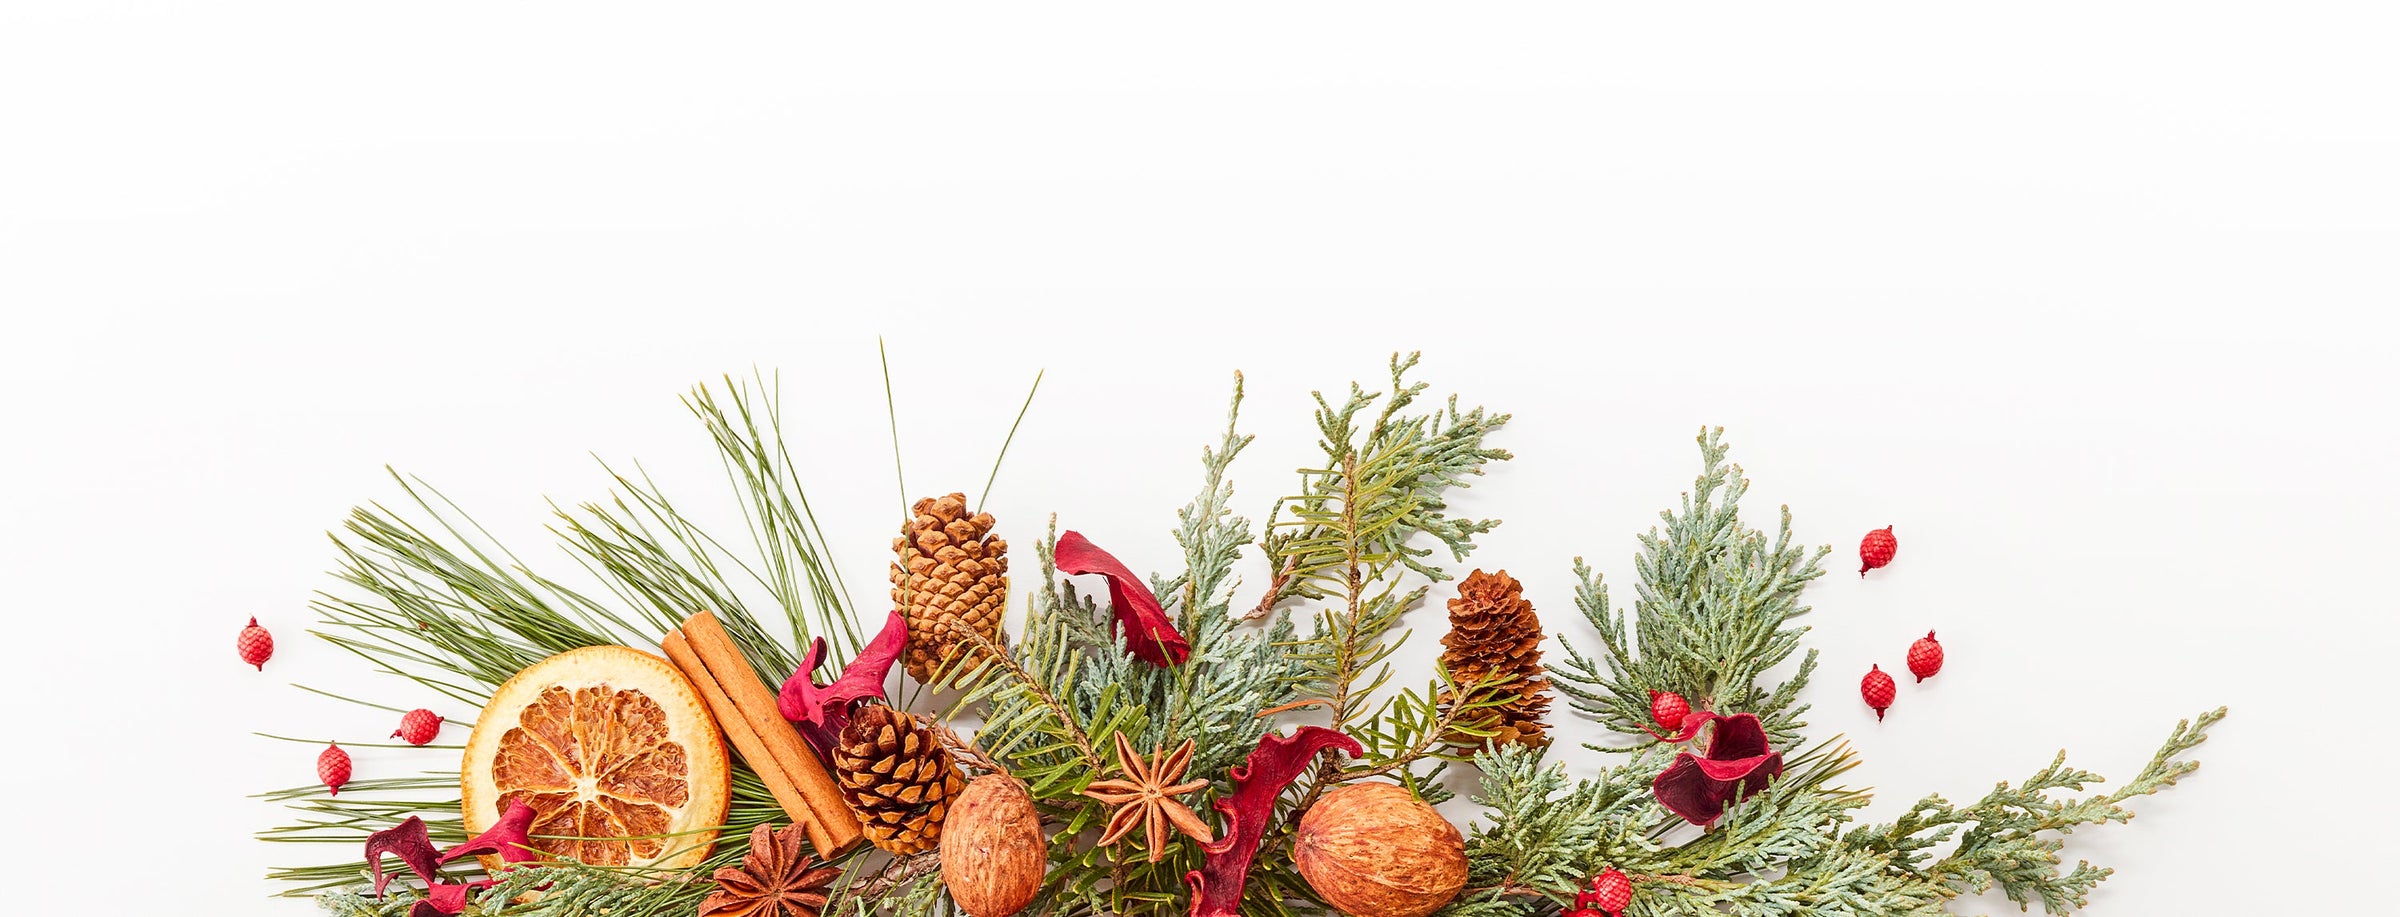 Pine greens, dried orange slices, cinnamon sticks, pine cones, and red berries placed together on a white backdrop